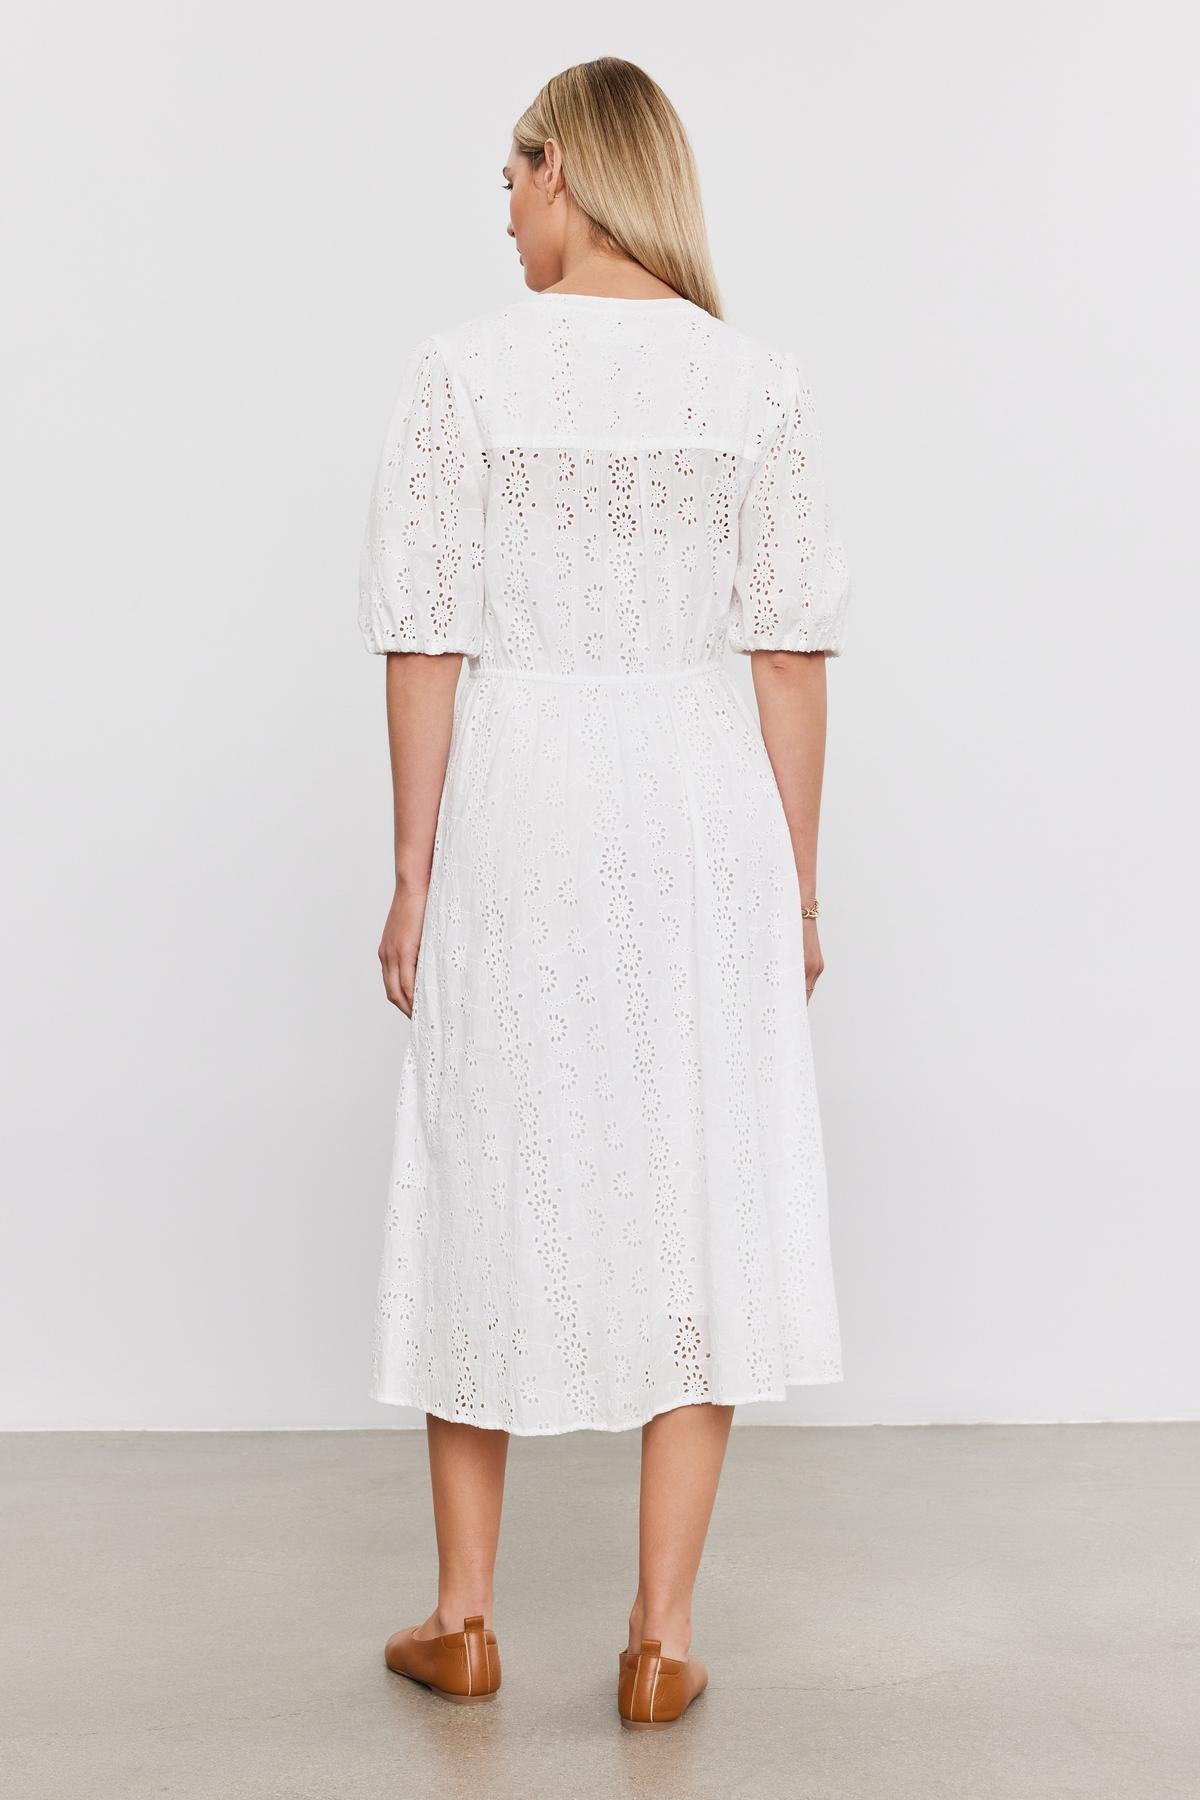 Woman in a white cotton eyelet mid-length RORI DRESS with puff sleeves, viewed from behind, standing against a plain background. She's wearing brown loafers by Velvet by Graham & Spencer.-36910267990209